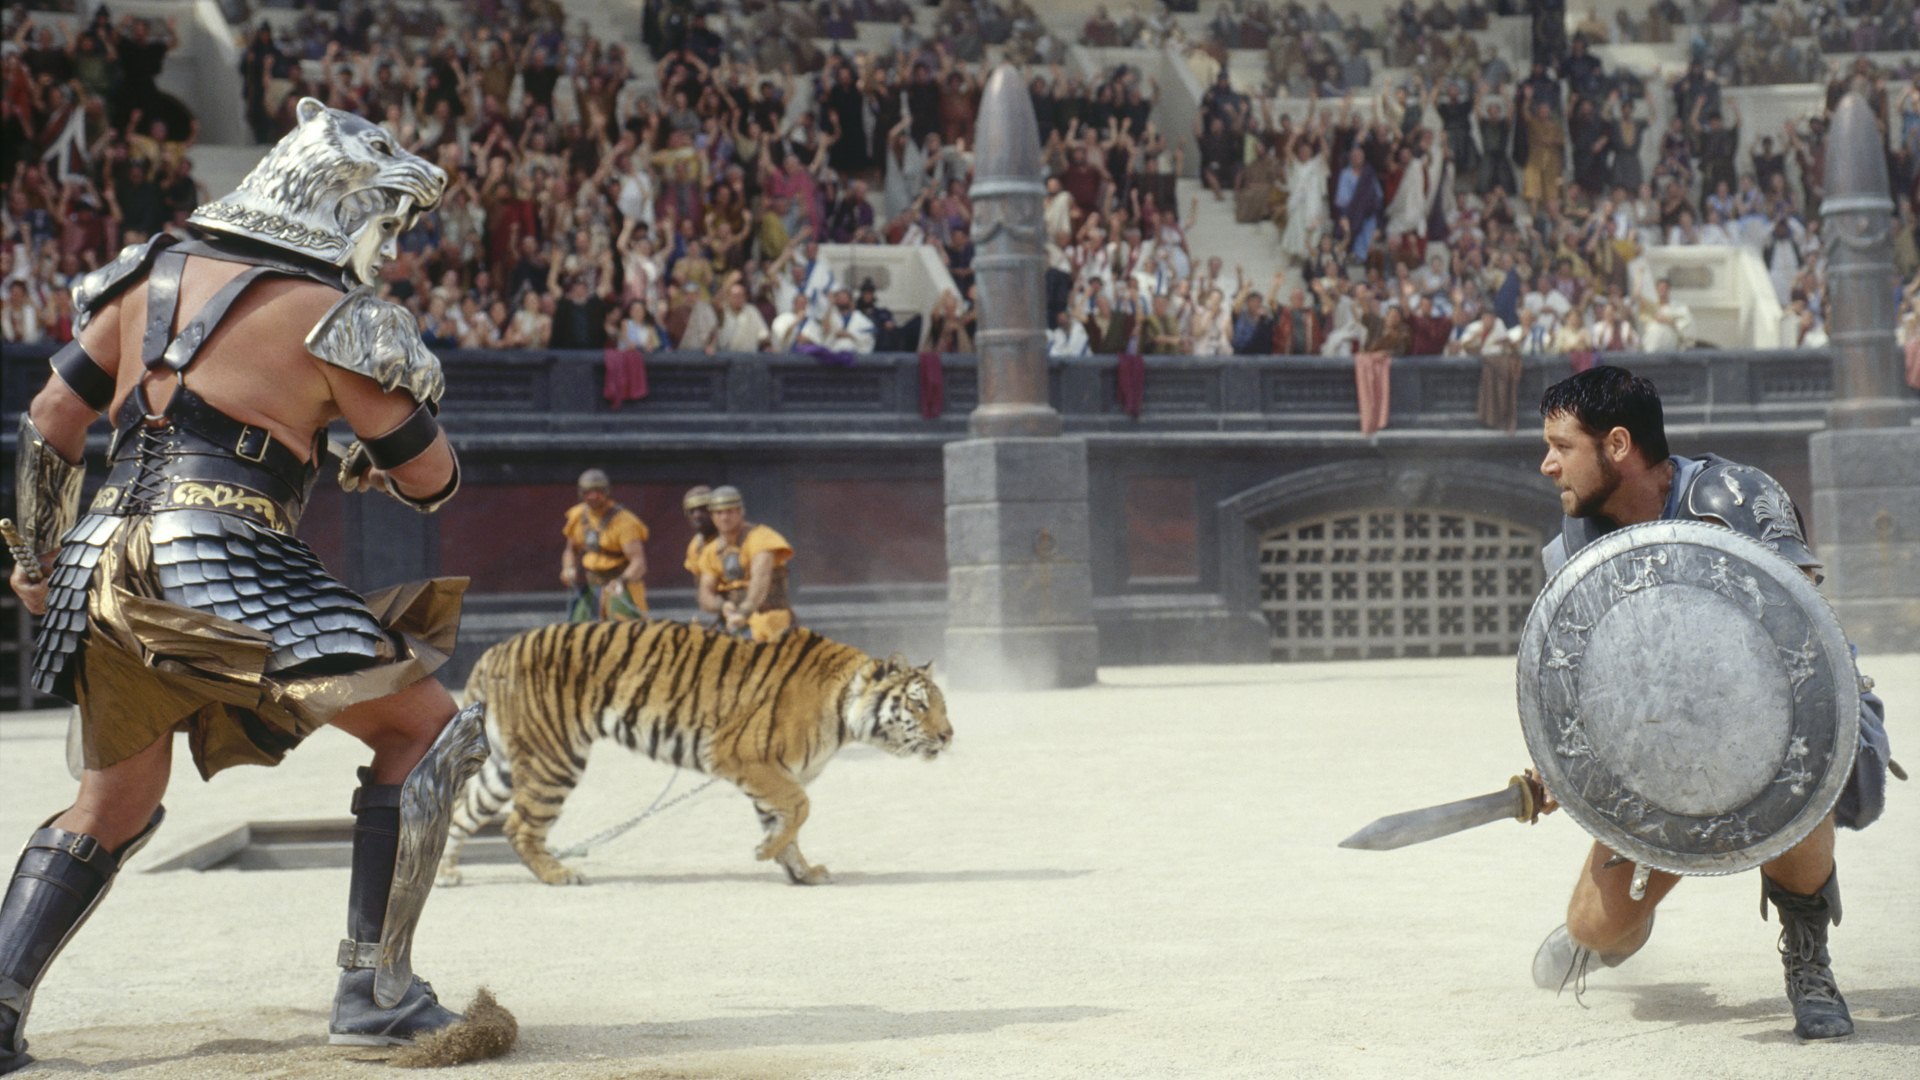 Movies_Fight_in_the_arena_in_the_film_Gladiator_096146_.jpg